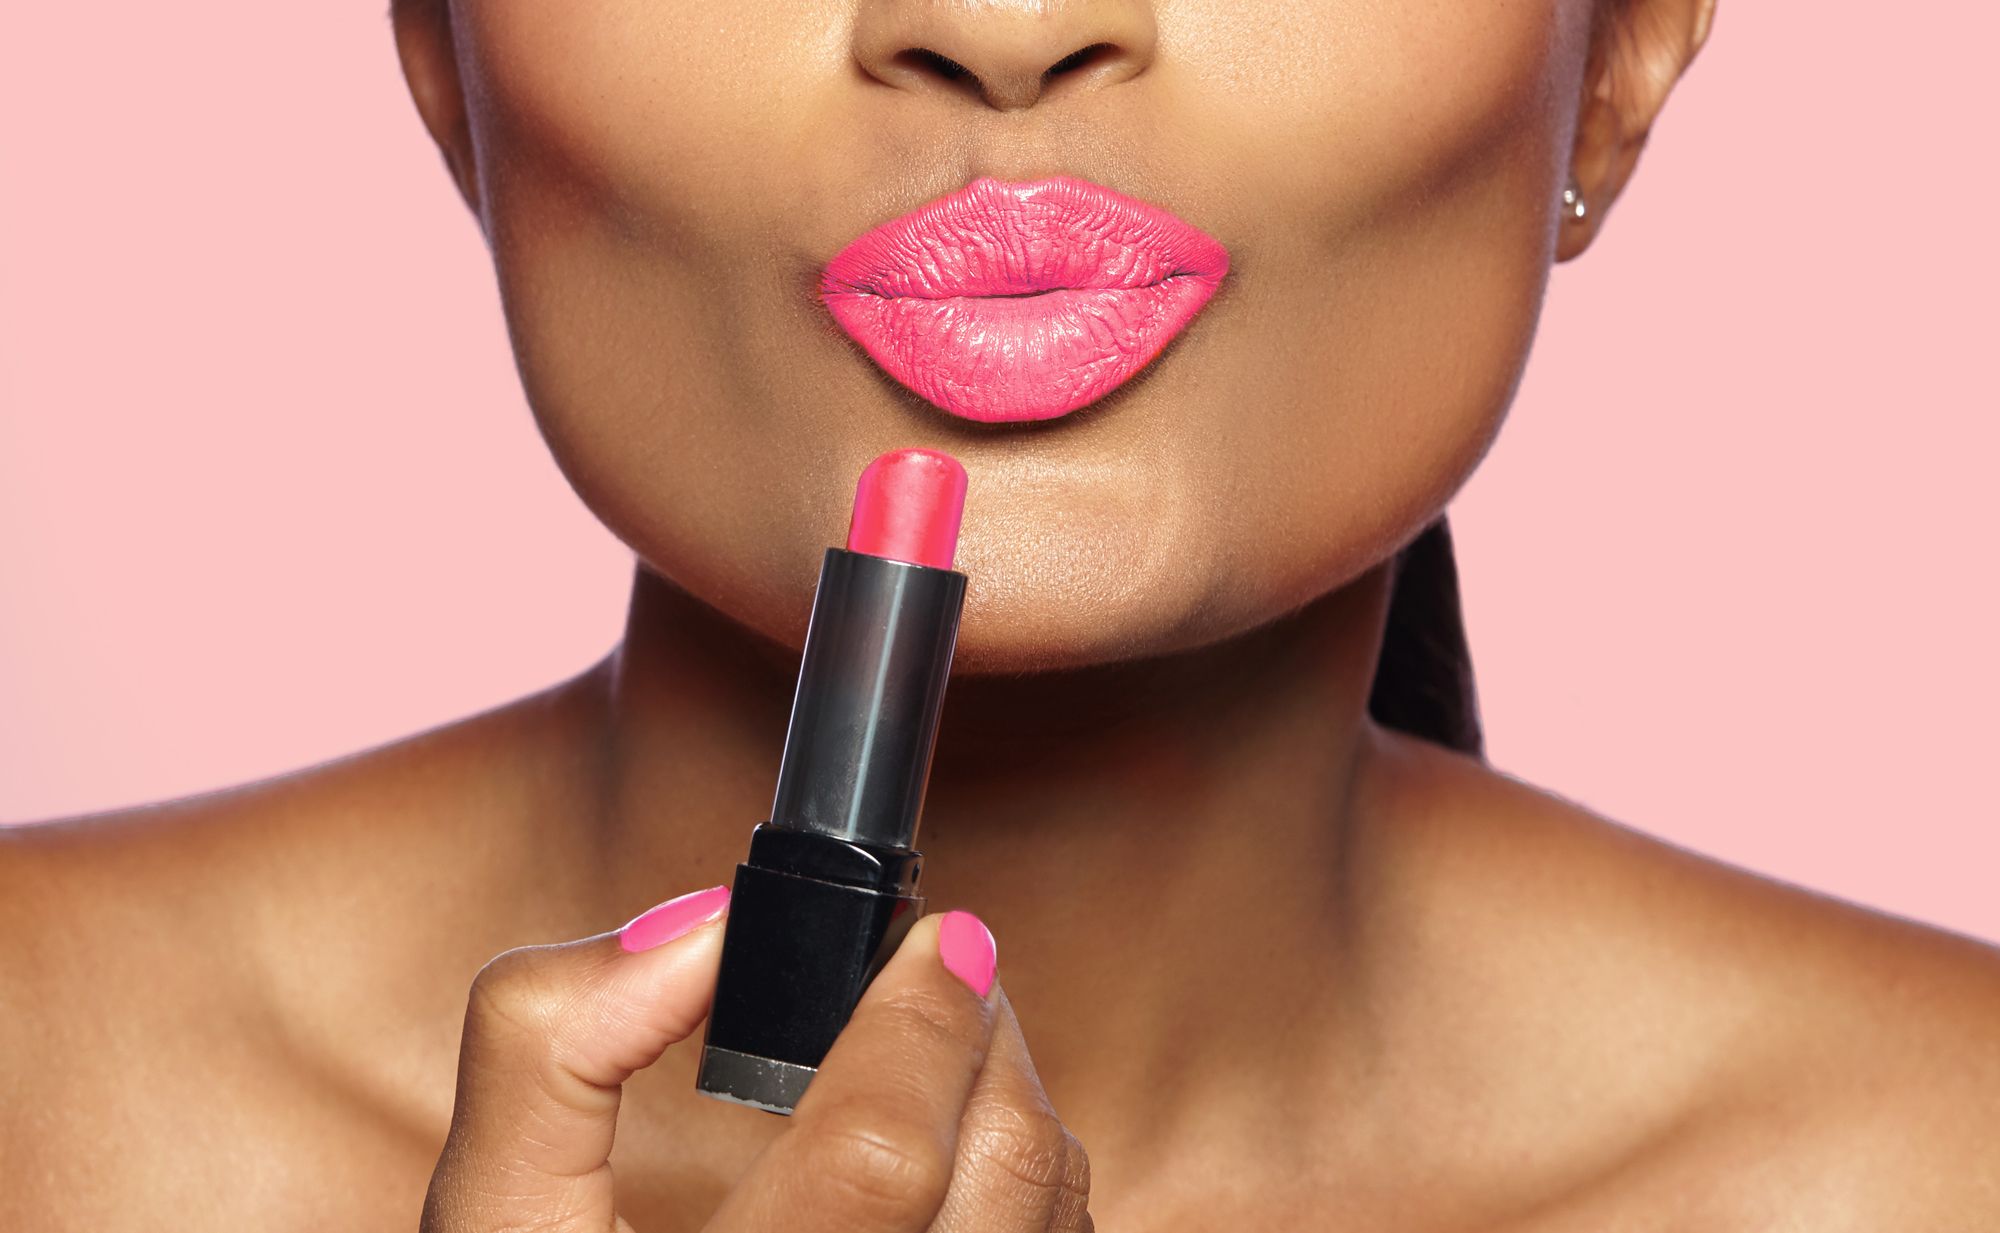 How to Apply Lipstick - Perfect Application Steps